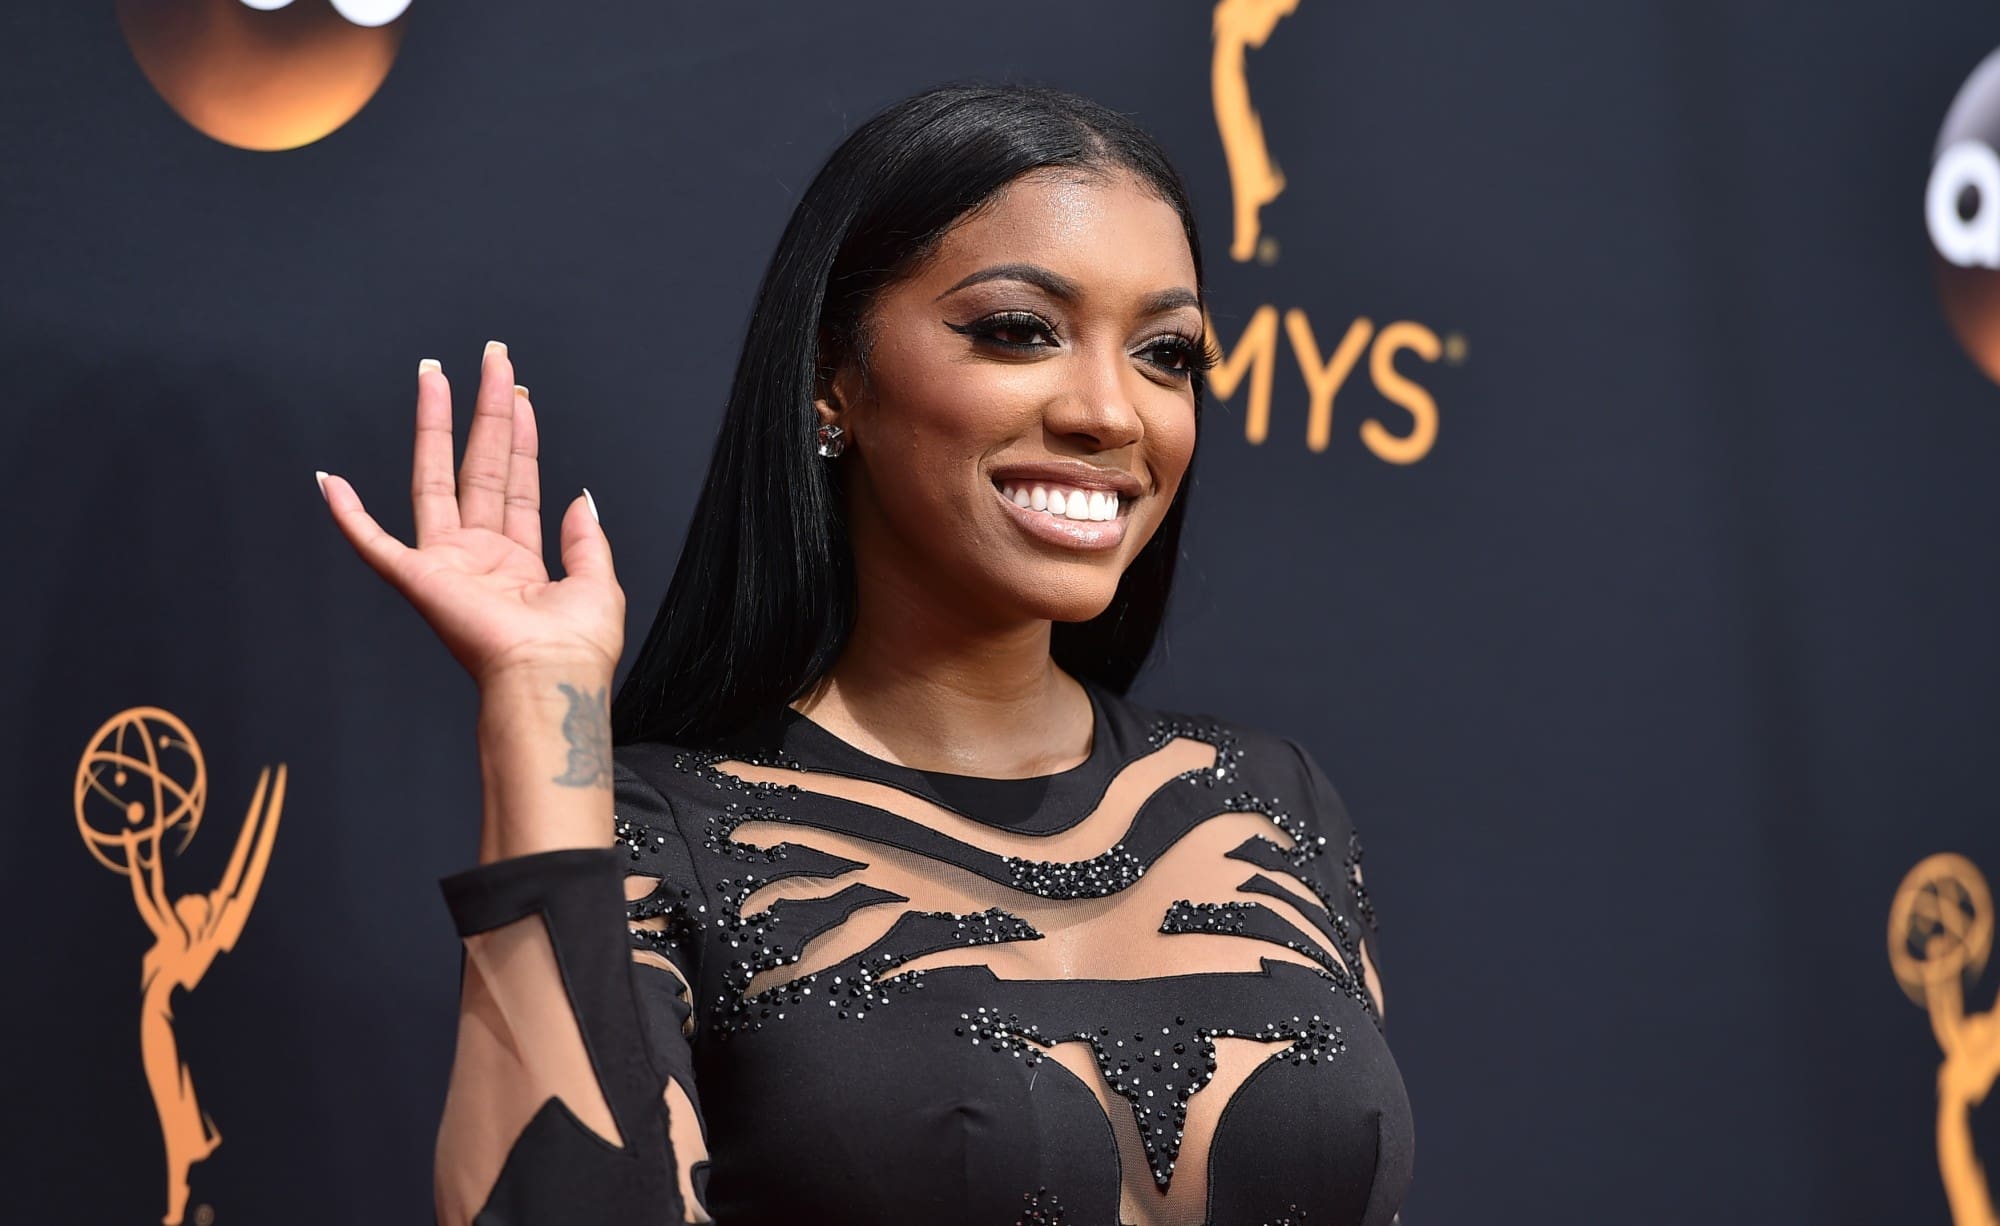 Porsha Williams Makes Fans' Holiday Shopping Merrier With This Announcement